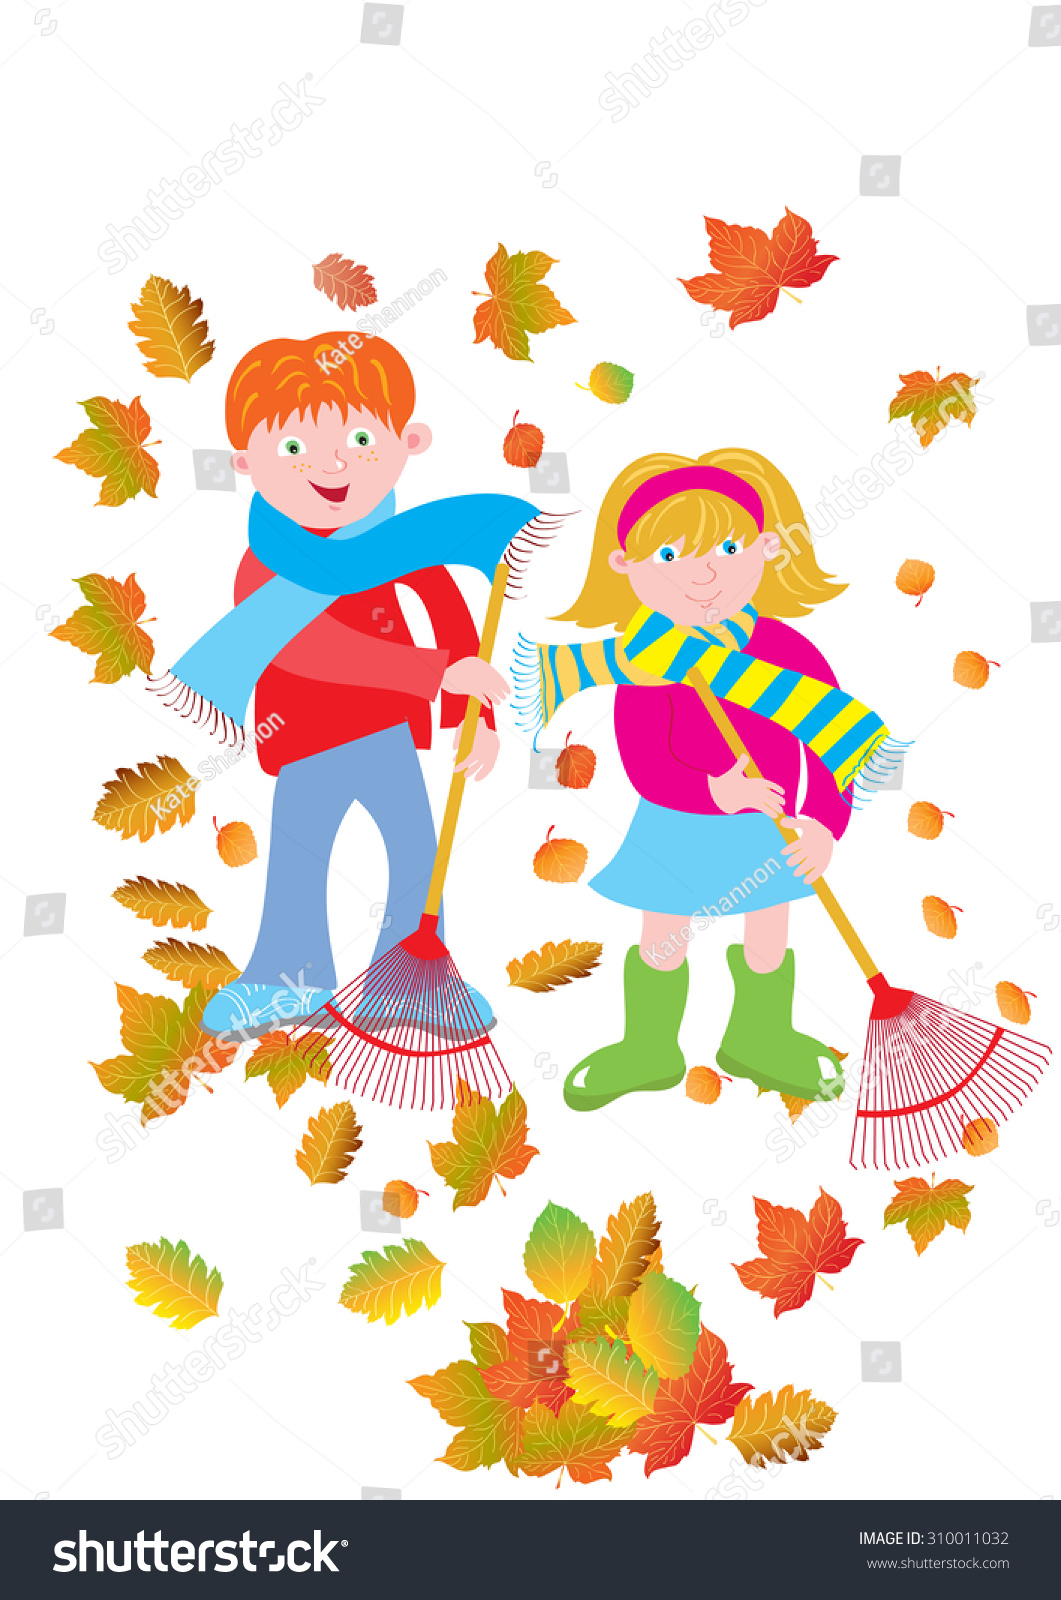 A Cartoon Illustration Of A Boy And A Girl Sweeping And Raking Fallen ...